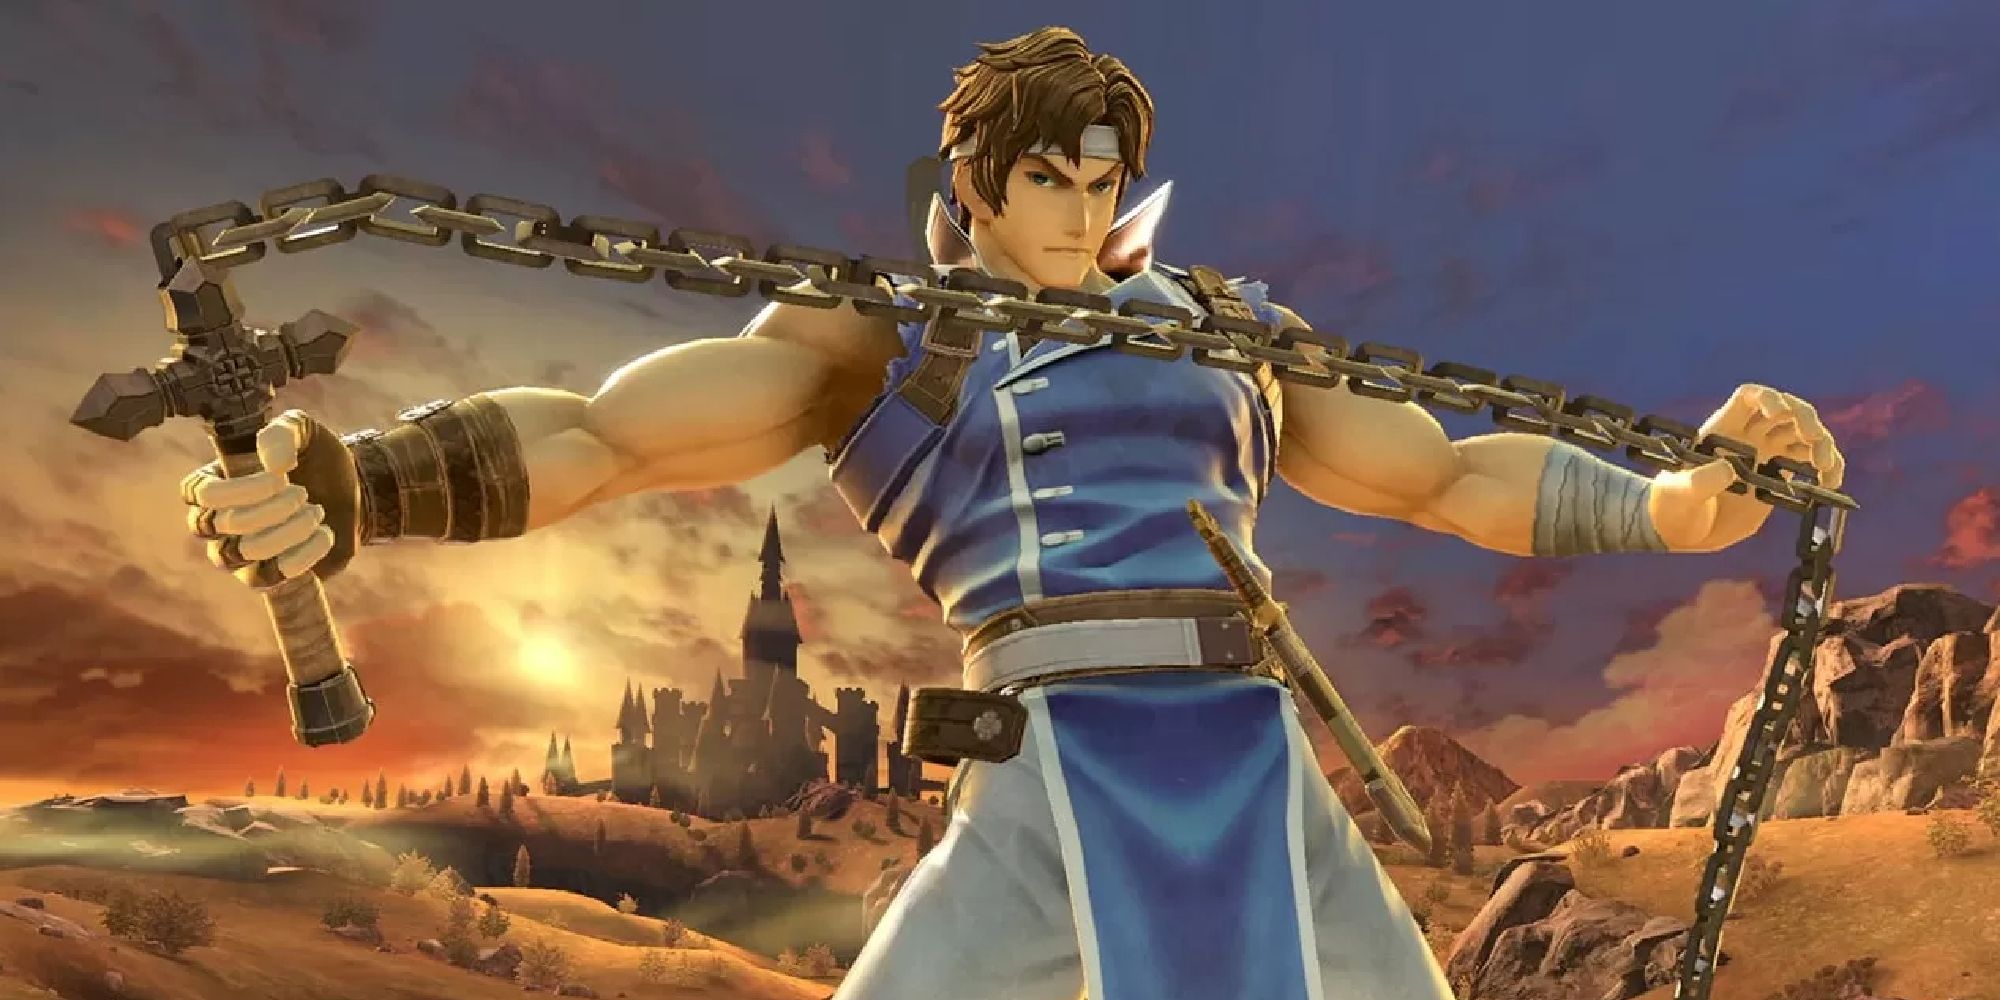 Richter Belmont taunting with his chain whip in Super Smash Bros Ultimate